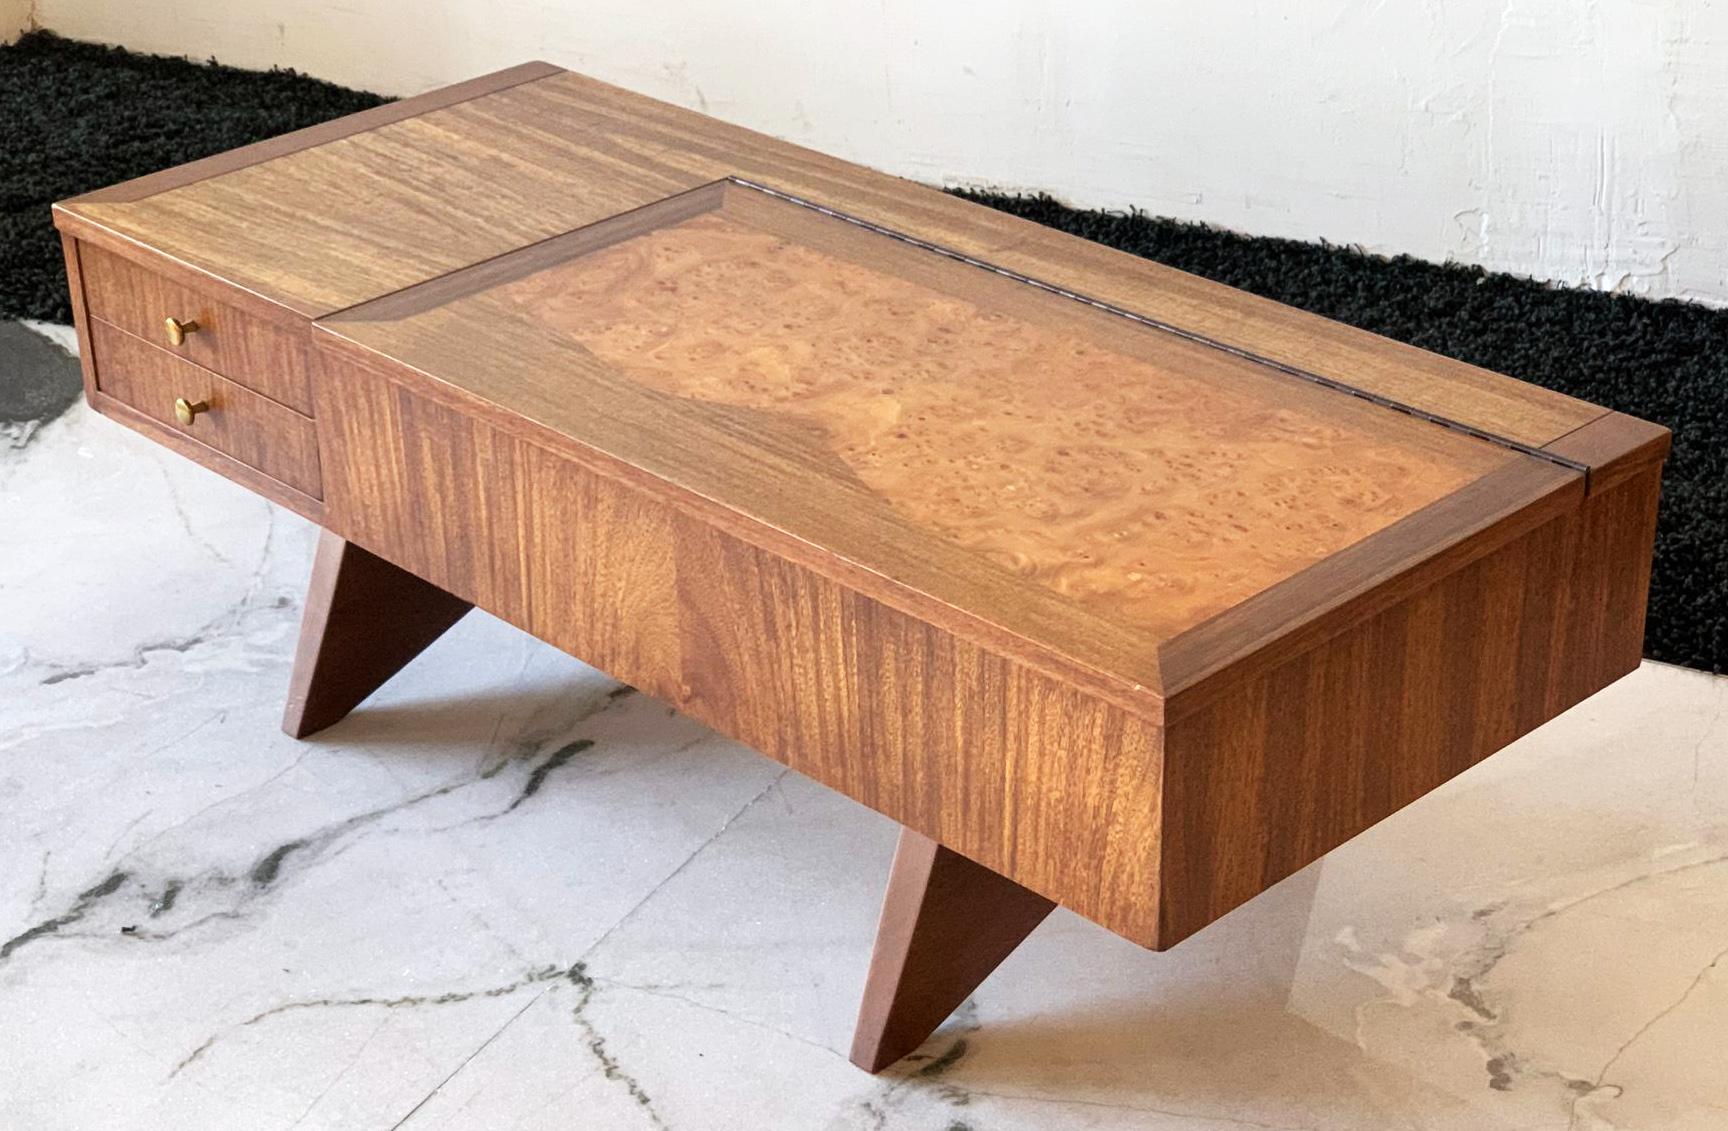 This coffee table is truly stunning; a George Nakashima for Widdicomb Origins collection walnut coffee table with the rare burl inlay. This coffee table has all the staples of a fine George Nakashima piece, splayed legs, walnut cross beam on the